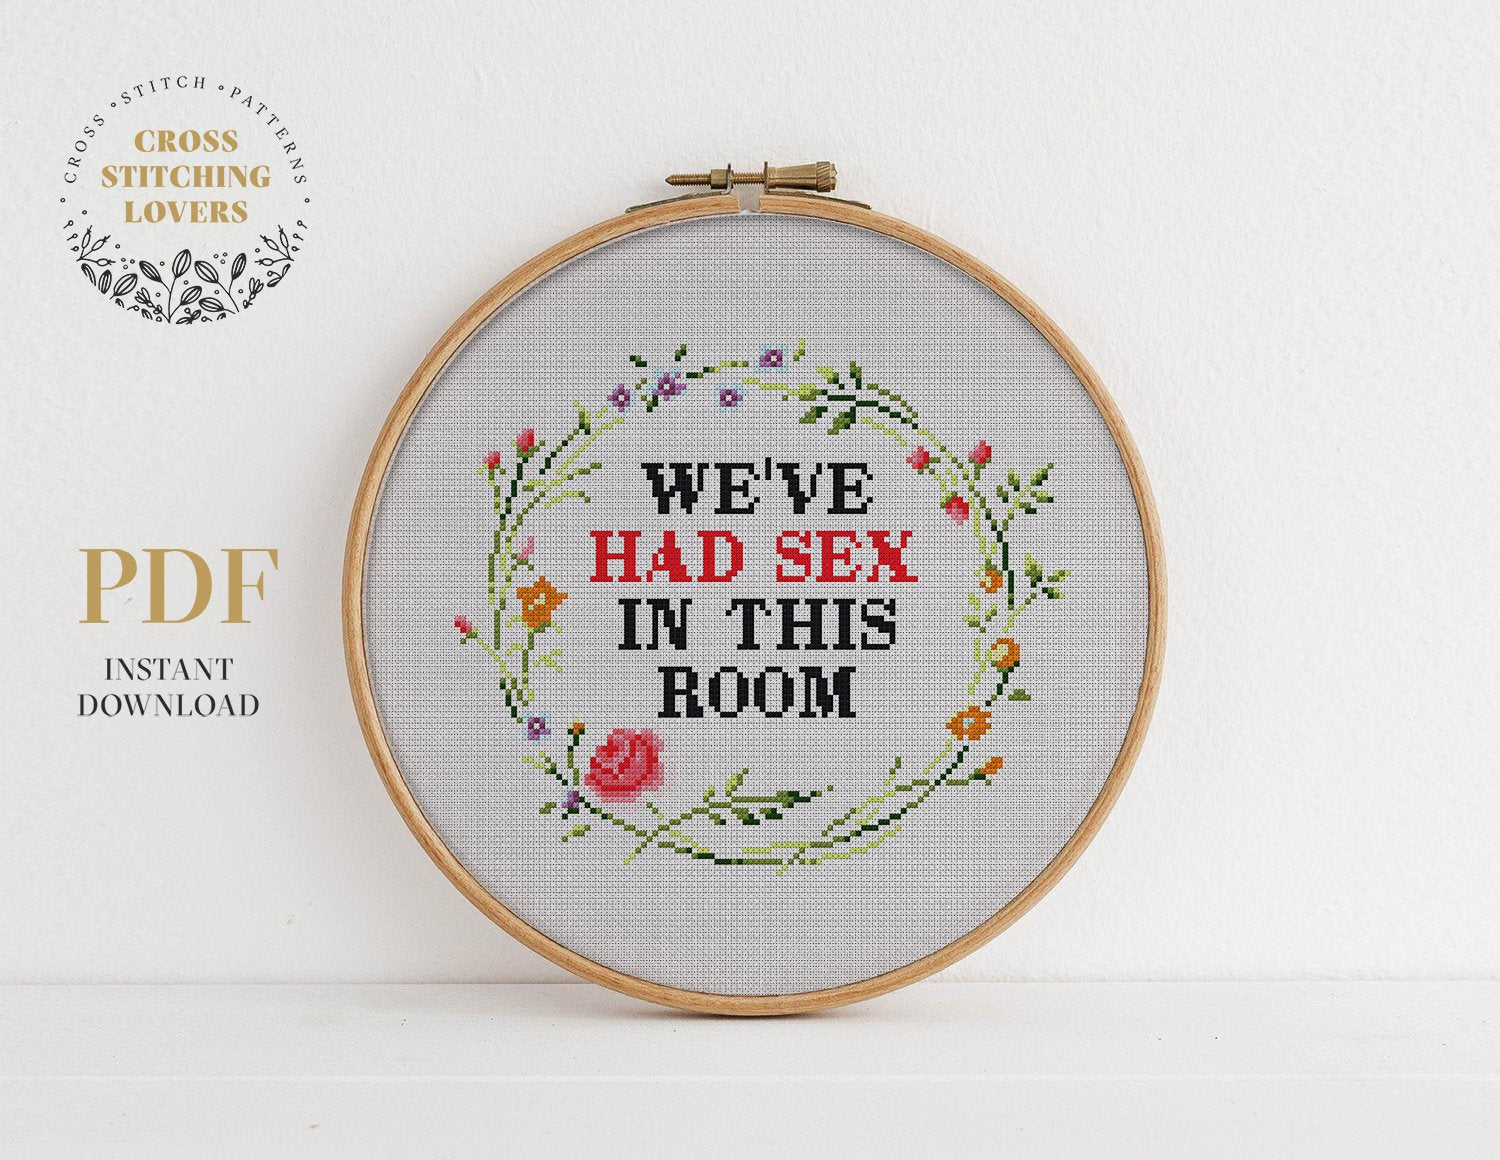 Funny "We've had sex in this room" - Cross stitch pattern